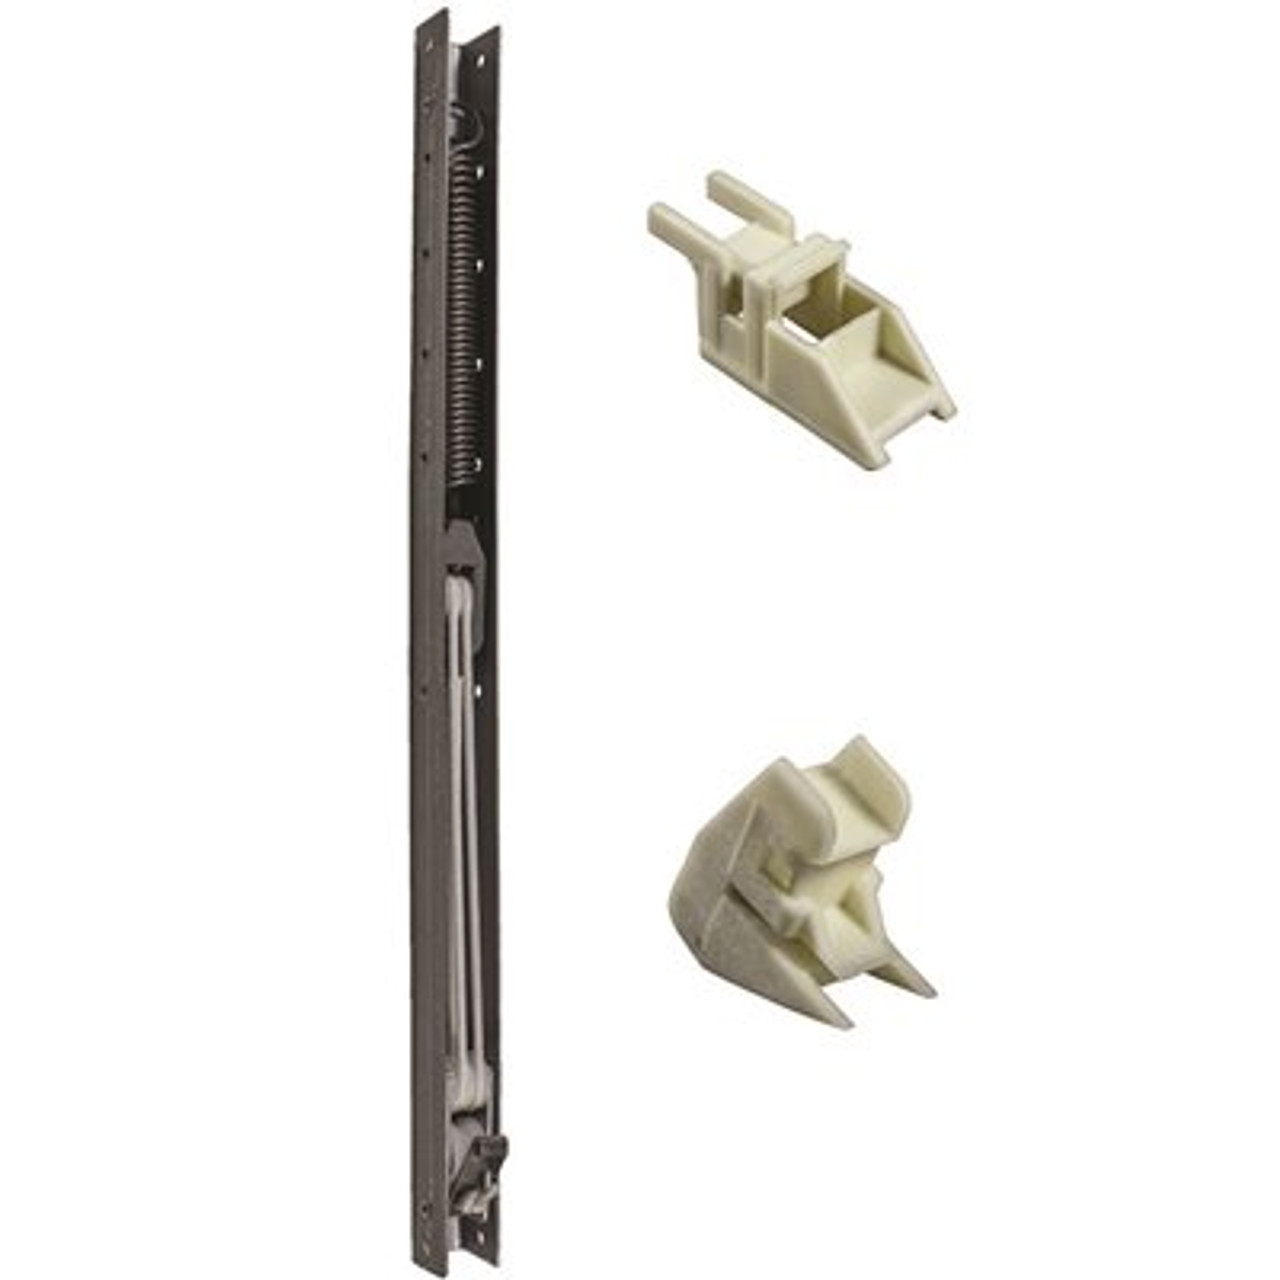 19 In. L Window Channel Balance 1810 With 9/16 In. W X 5/8 In. D Top And Bottom End Brackets Attached - 314413234